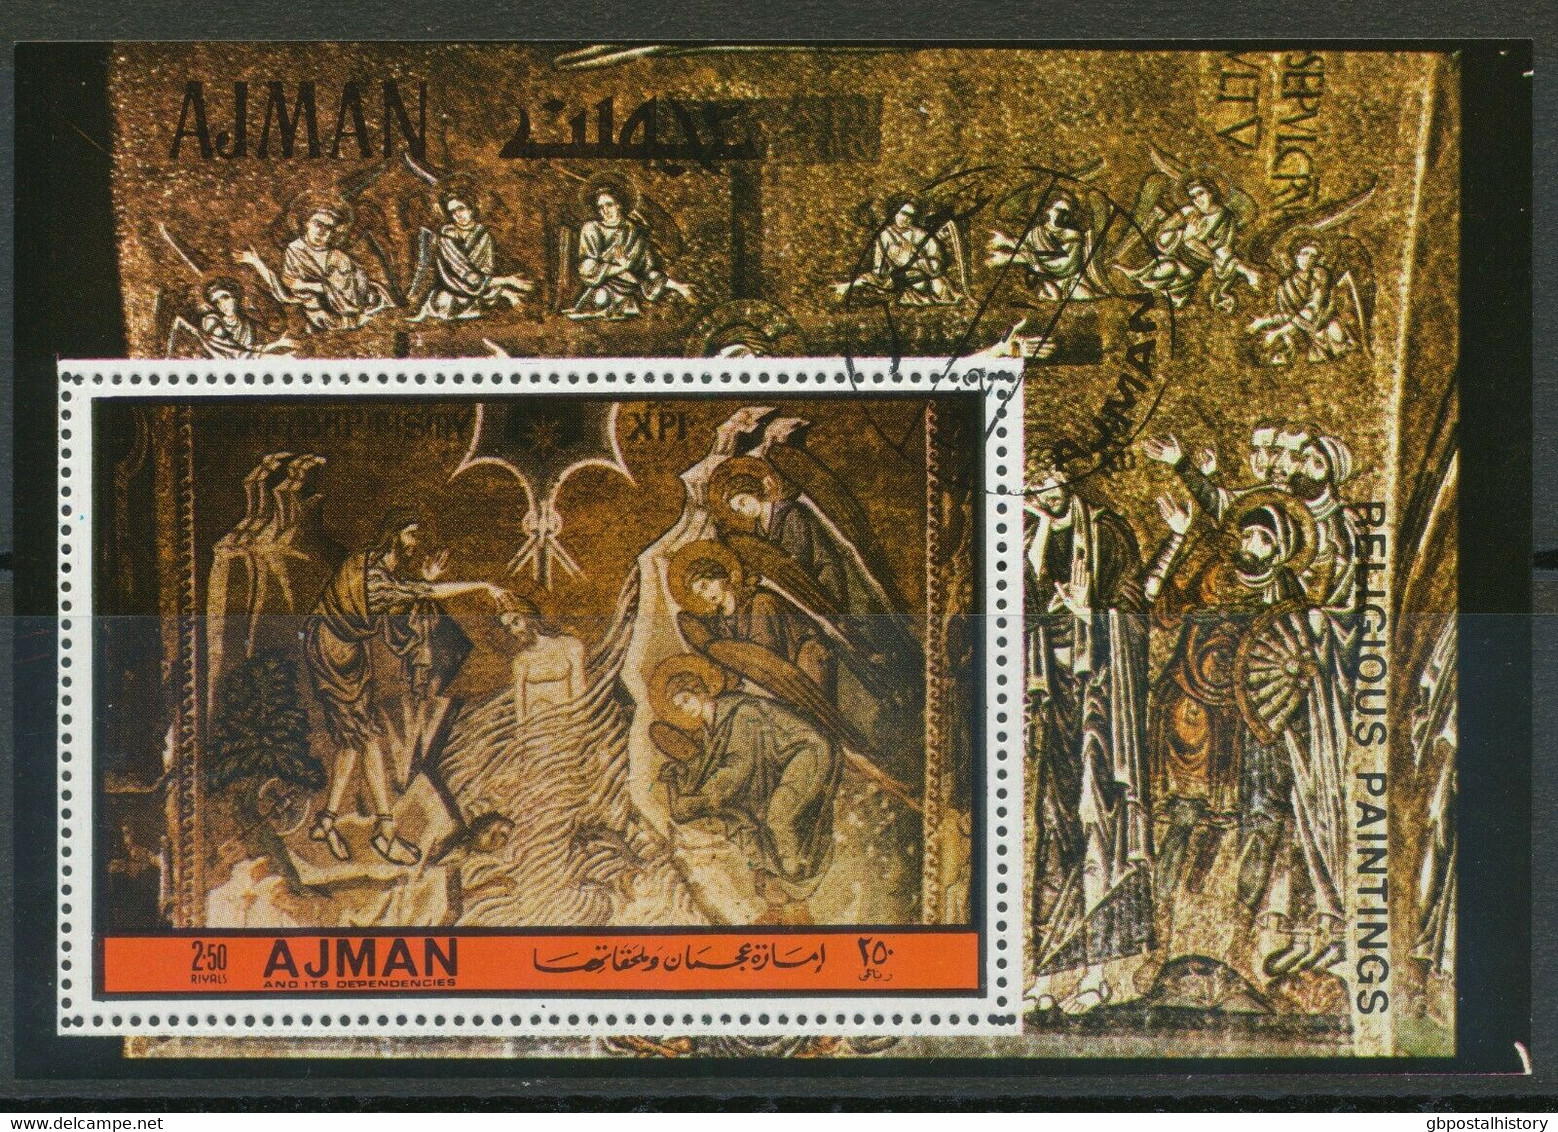 AJMAN 1972 Religious Paintings 2.50 R. Superb Used MS VARIETY: THICK CARDBOARD-LIKE PAPER - Adschman